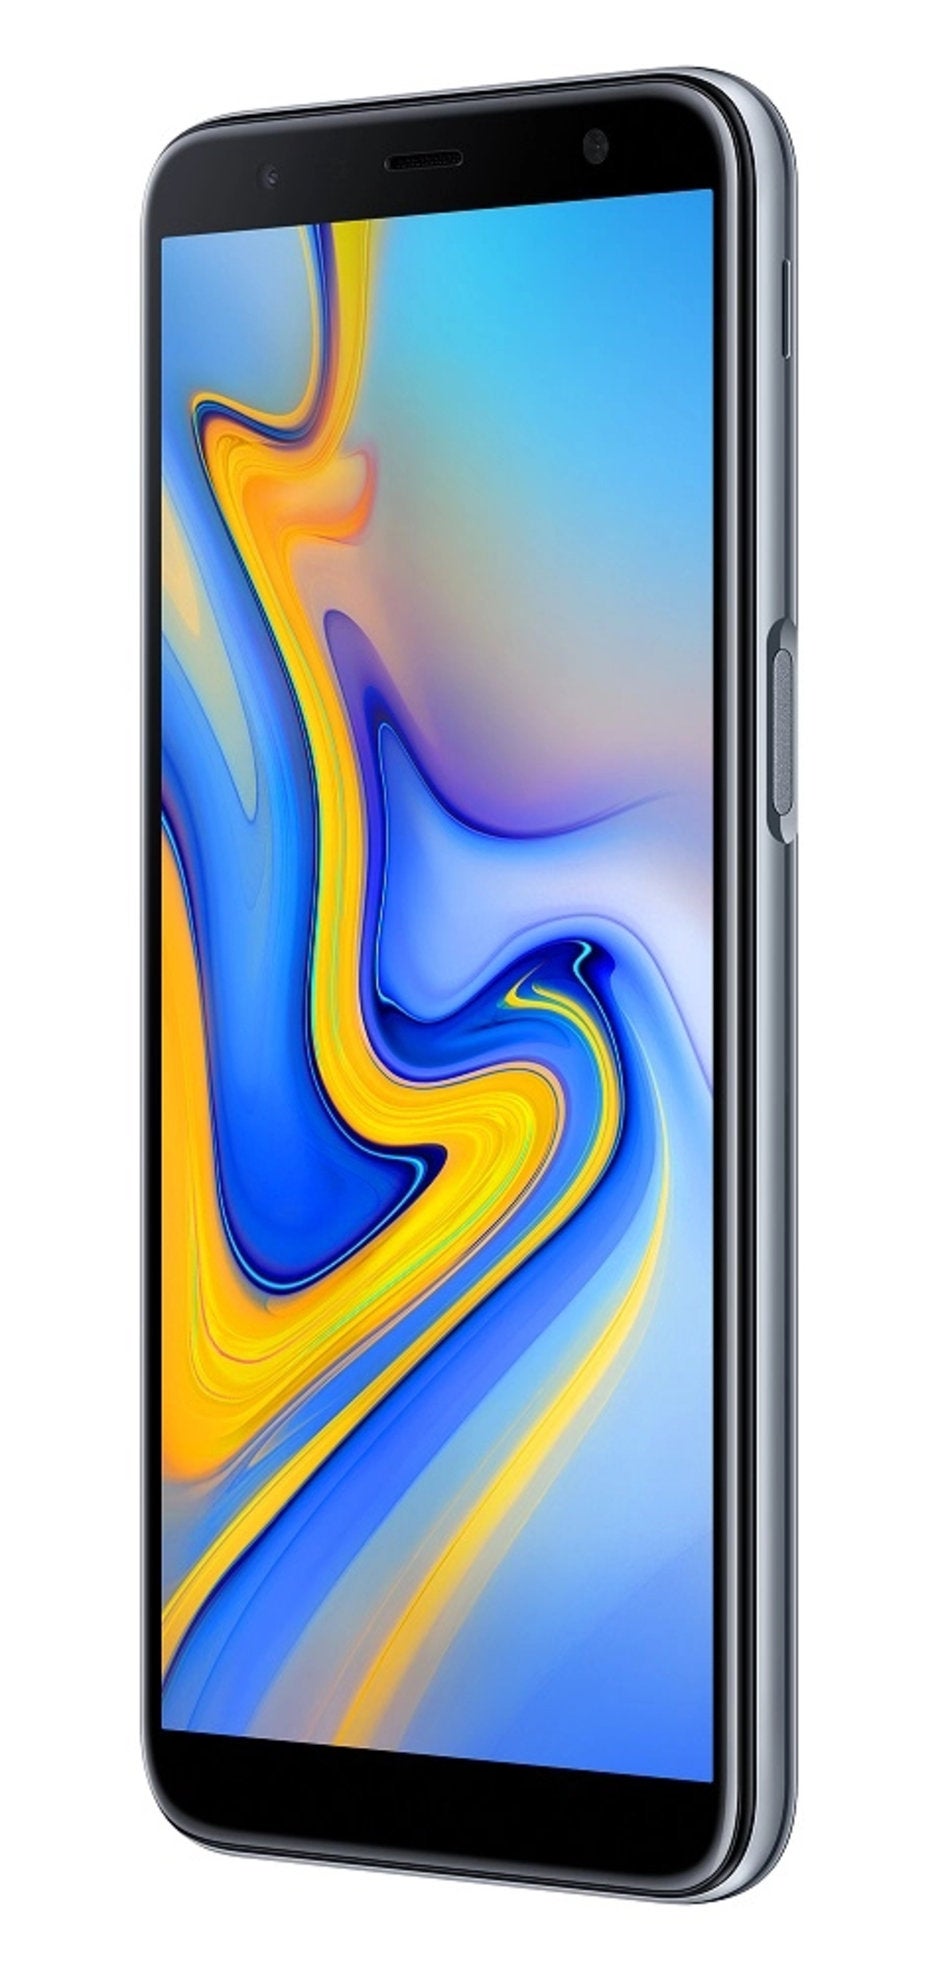 Samsung Galaxy J6+ doing it right - Is Samsung about to make a terrible mistake with the Galaxy S10e's fingerprint scanner?